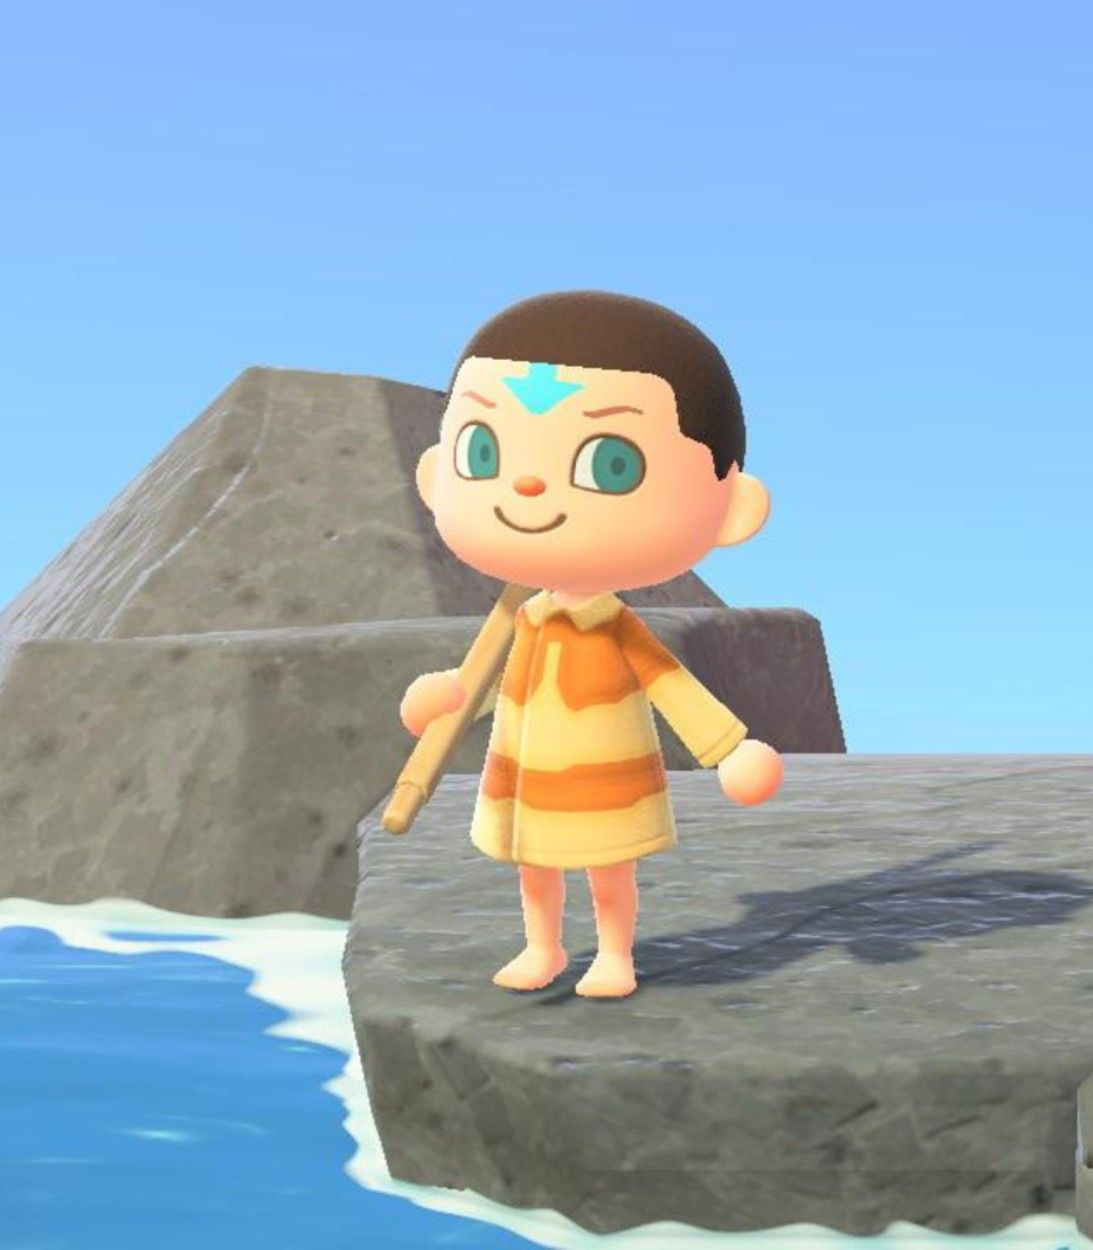 A player dressed as Aang from Avatar: The Last Airbender in Animal Crossing: New Horizons